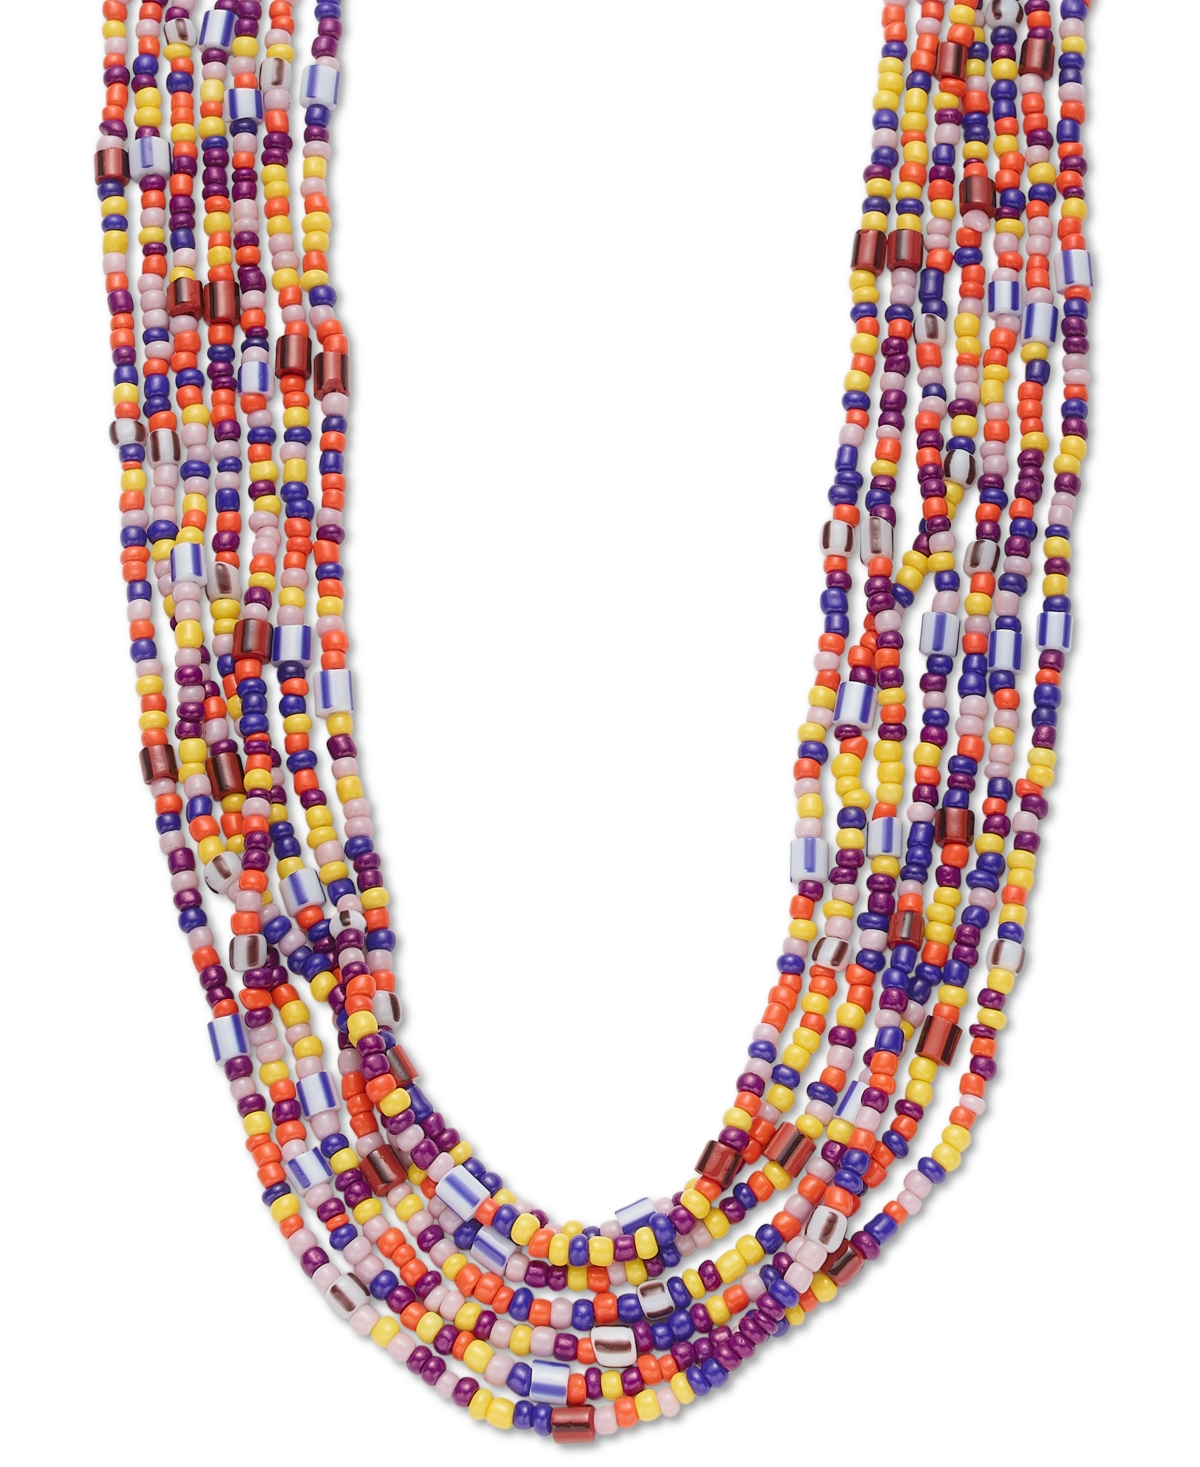 Gold-Tone Multicolor Seed Bead Layered Collar Necklace, 18" + 3" extender, Created for Macy's - Multi